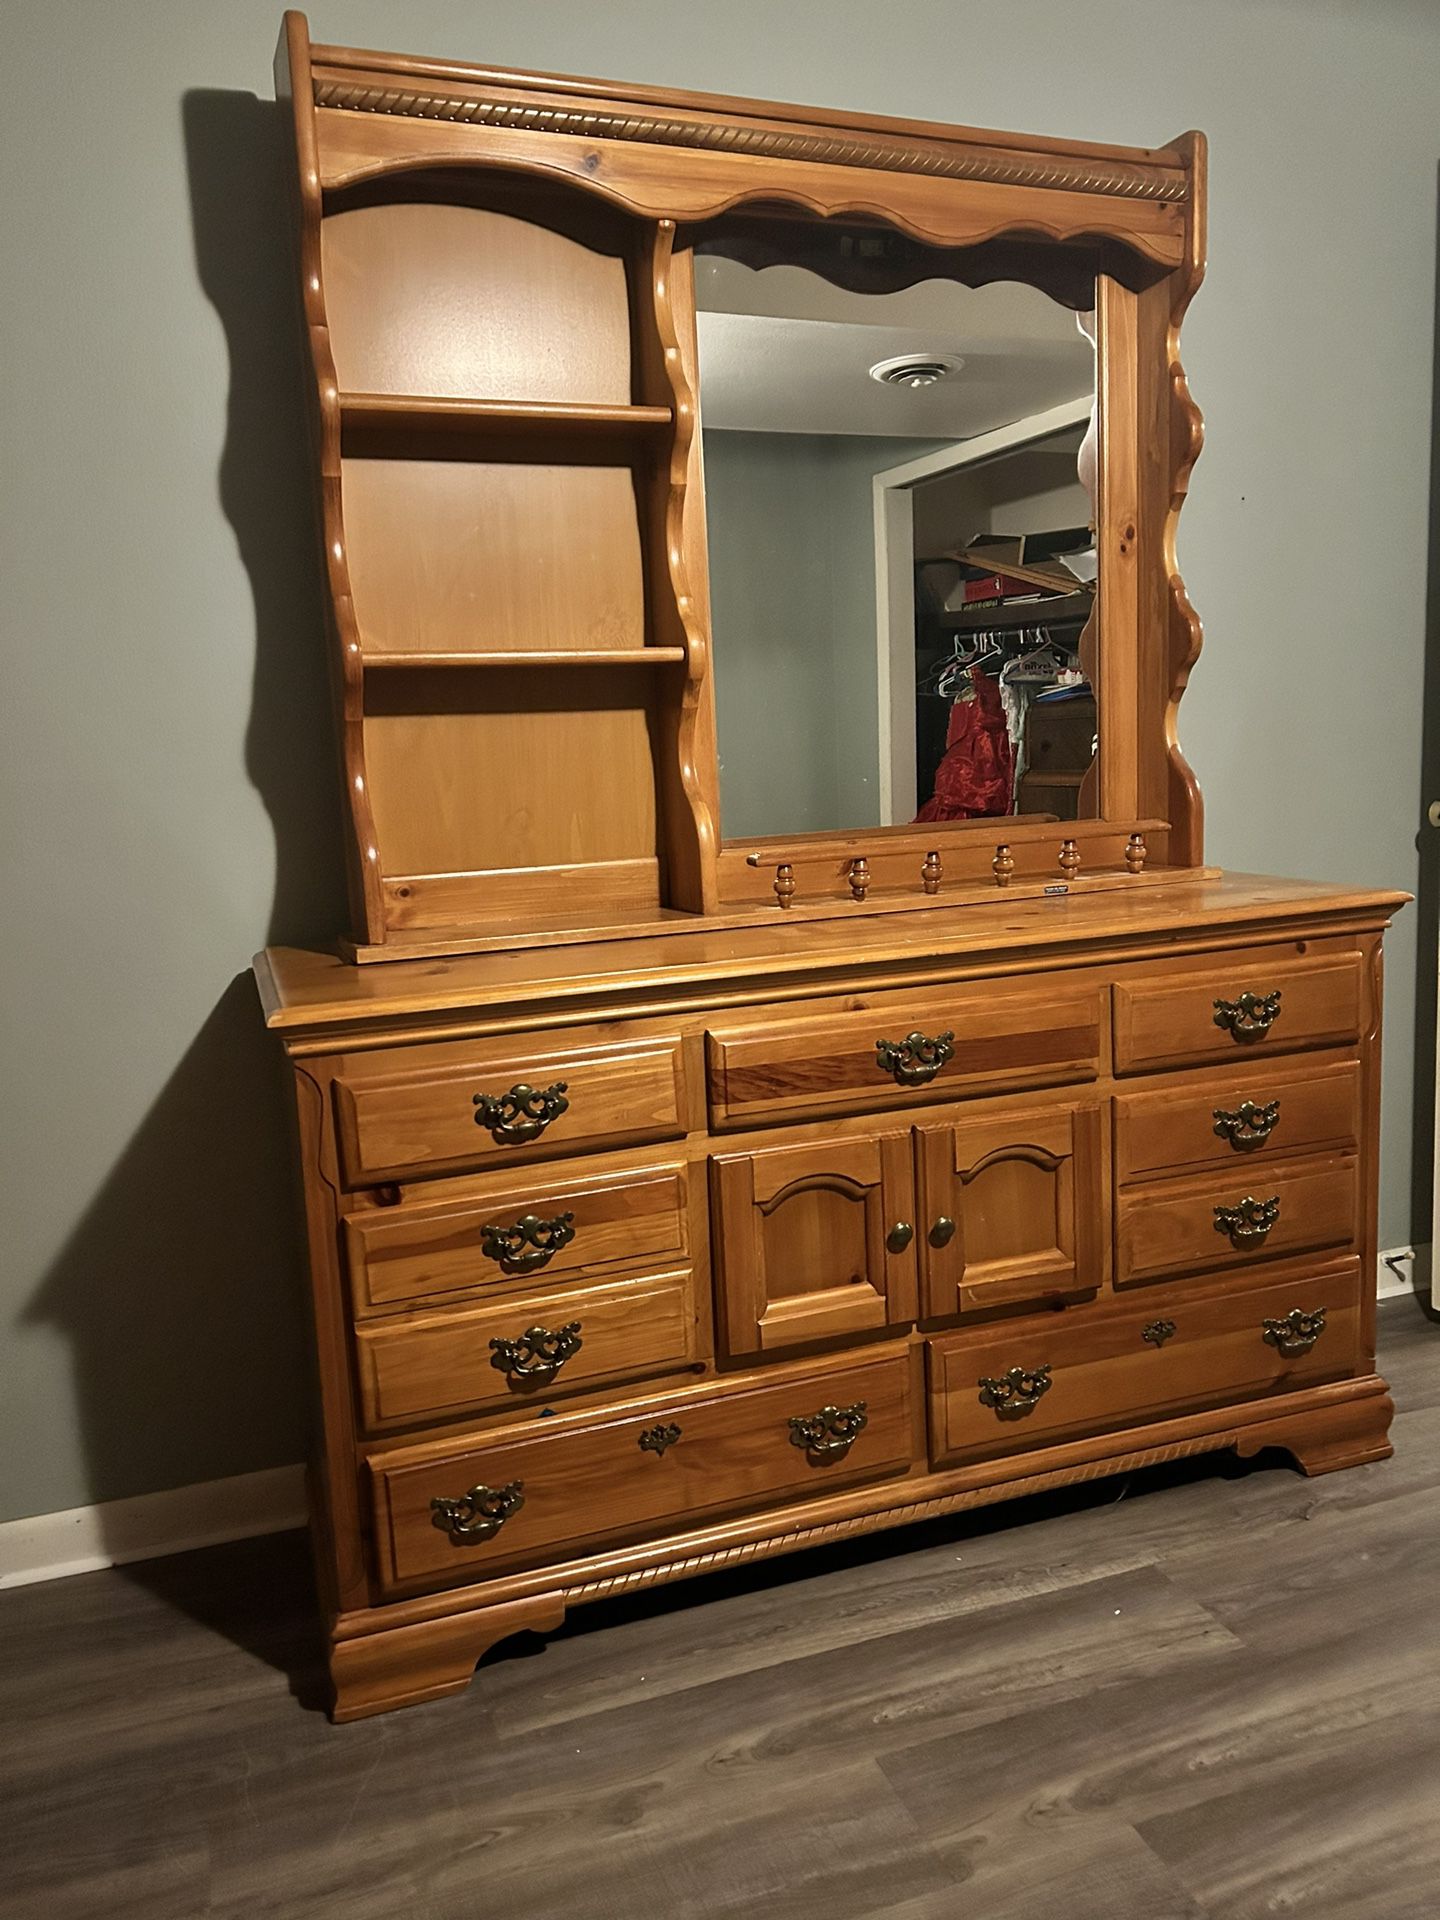 Bedroom Furniture - Bed, Dressers, Night Stand